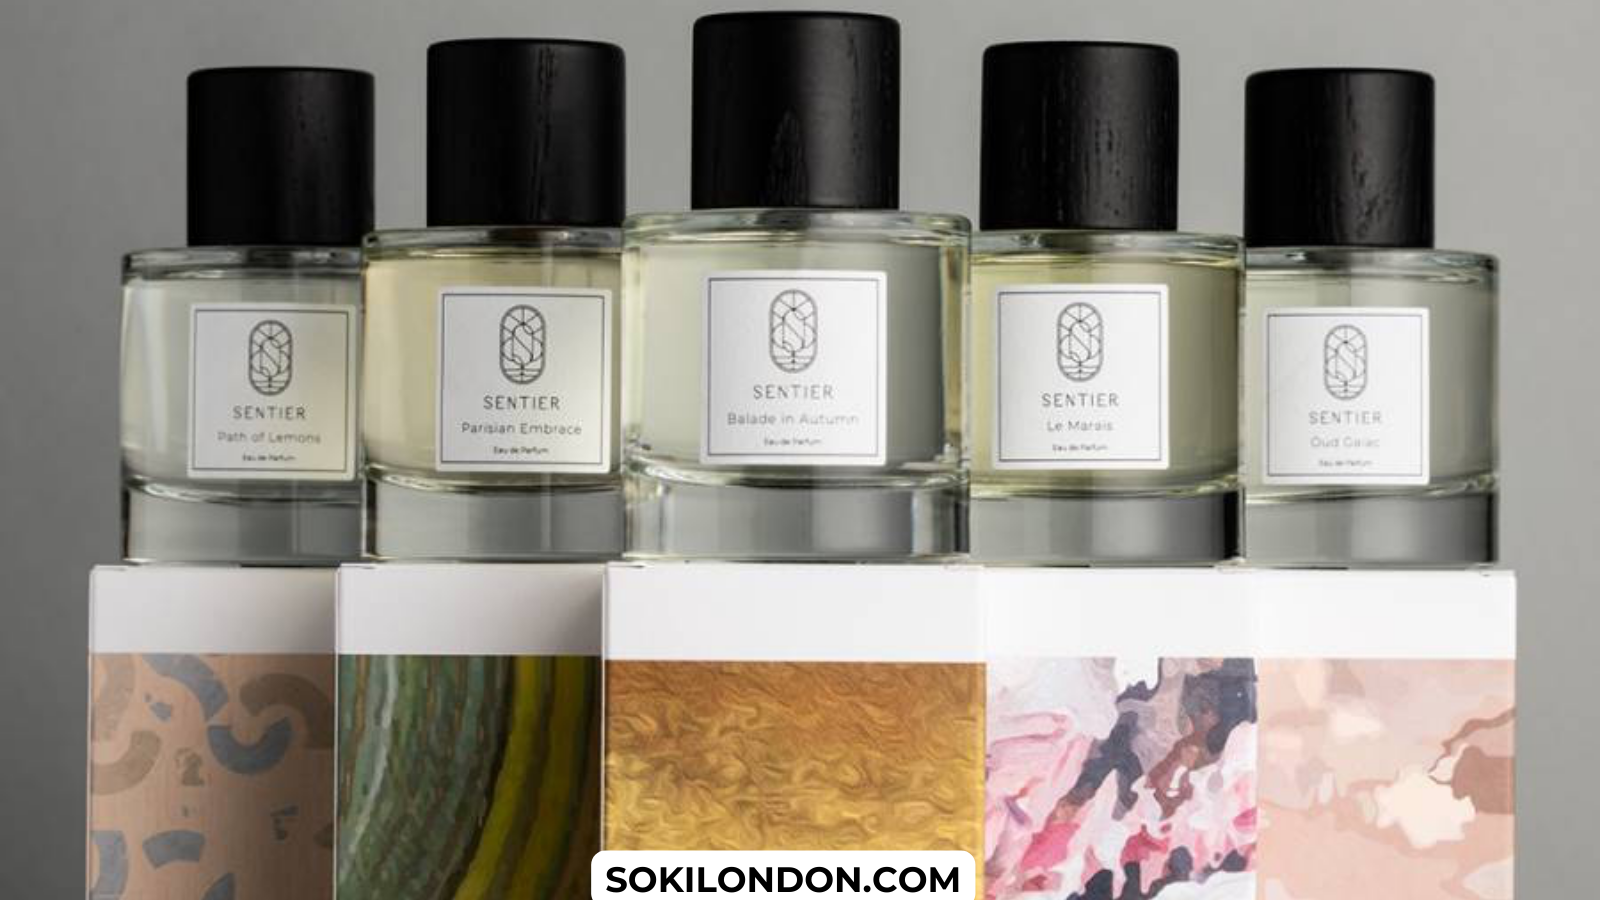 A Guide To The Sentier Fragrance Range